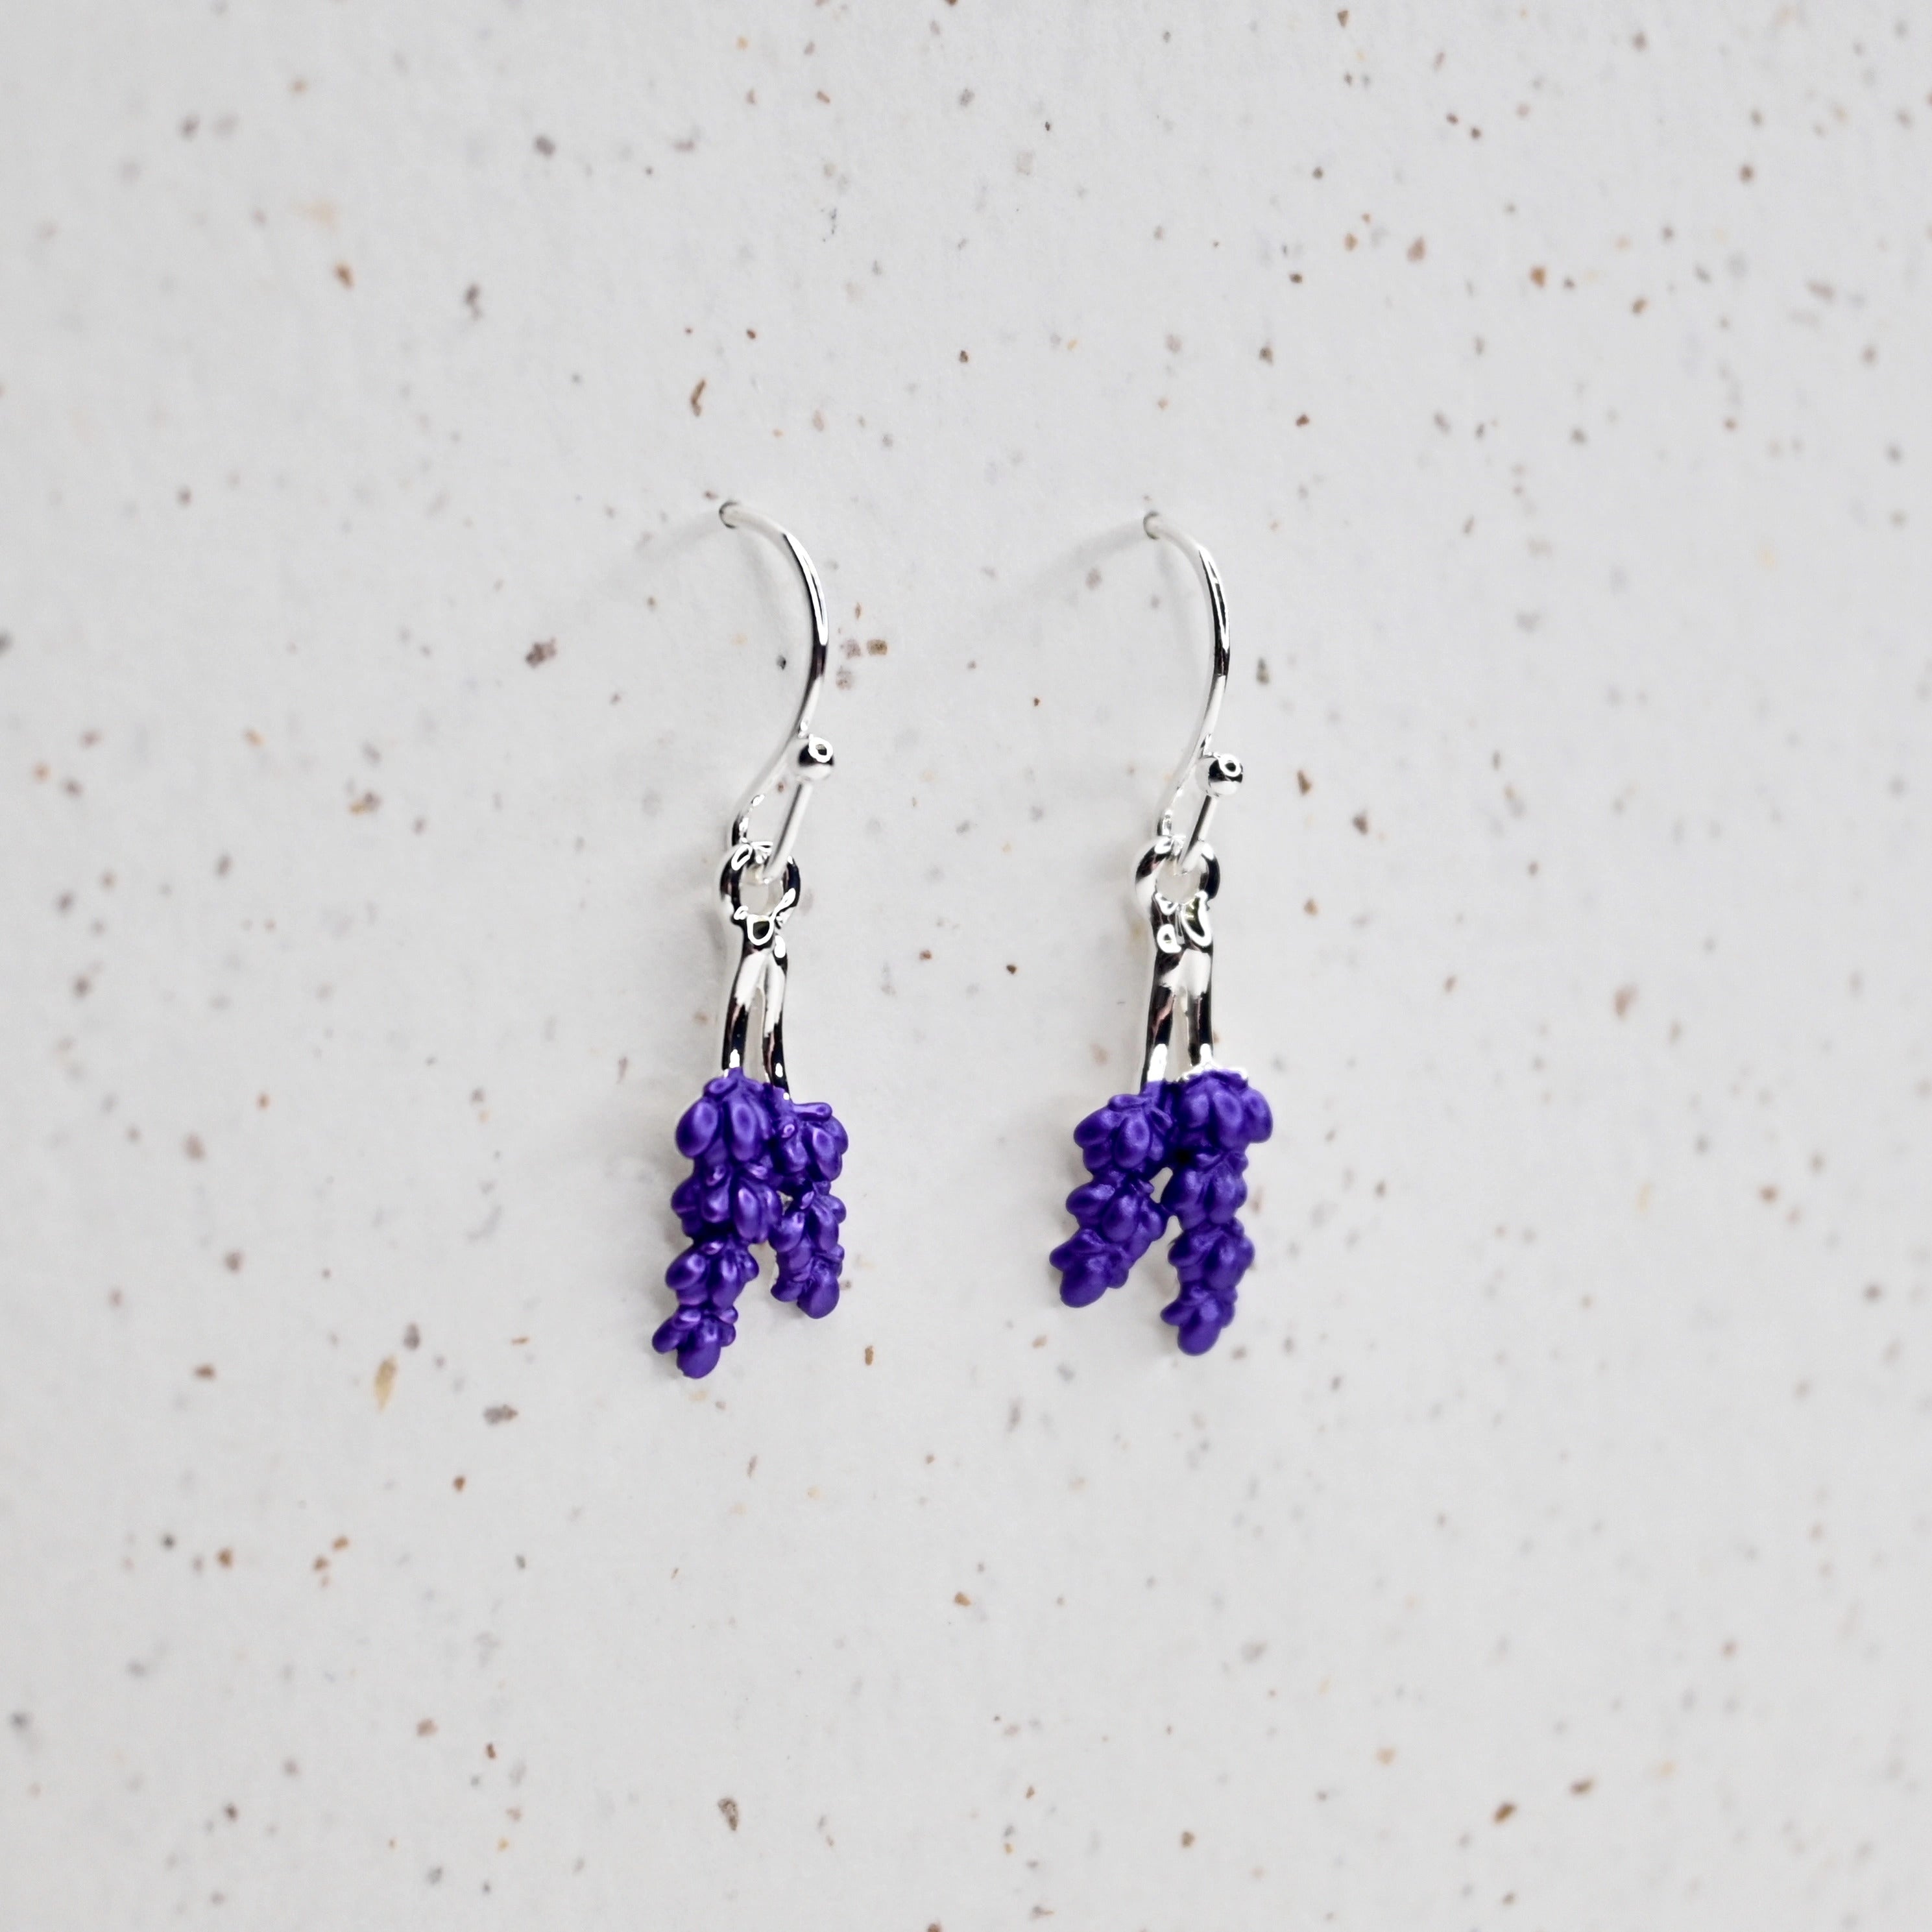 Handcrafted Lavender Earrings in Silver